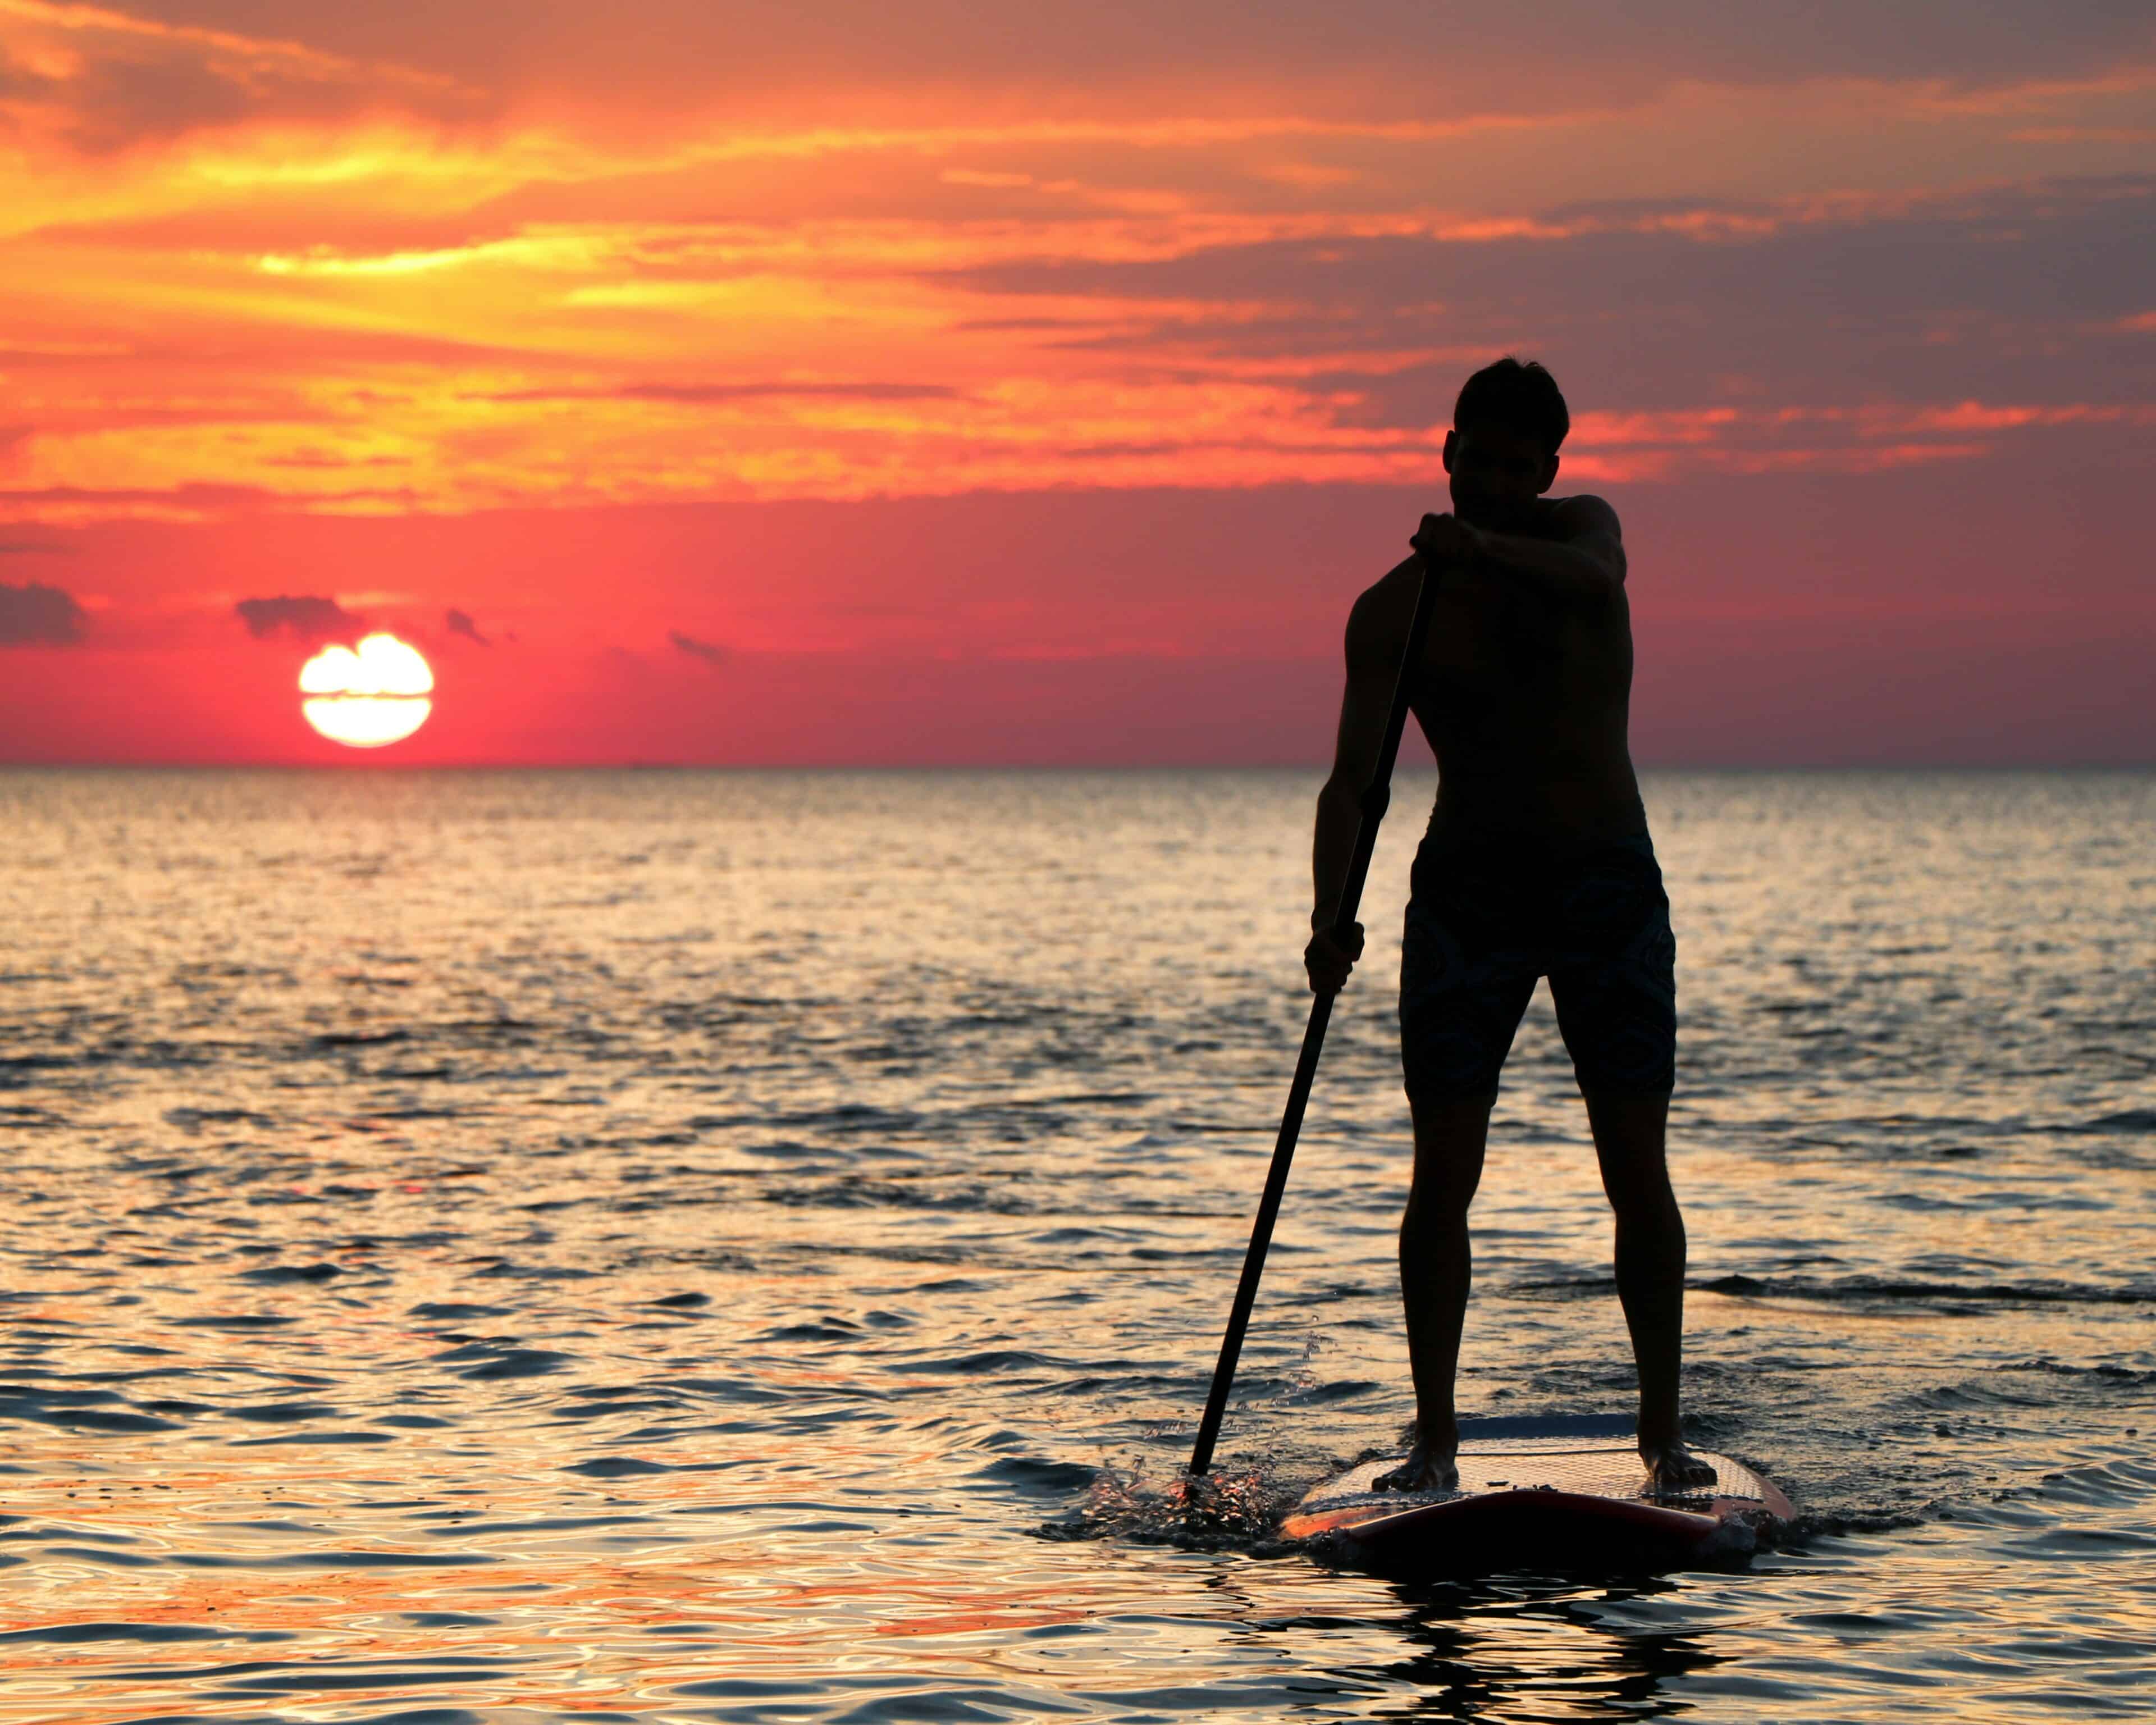 What is stand-up paddle boarding